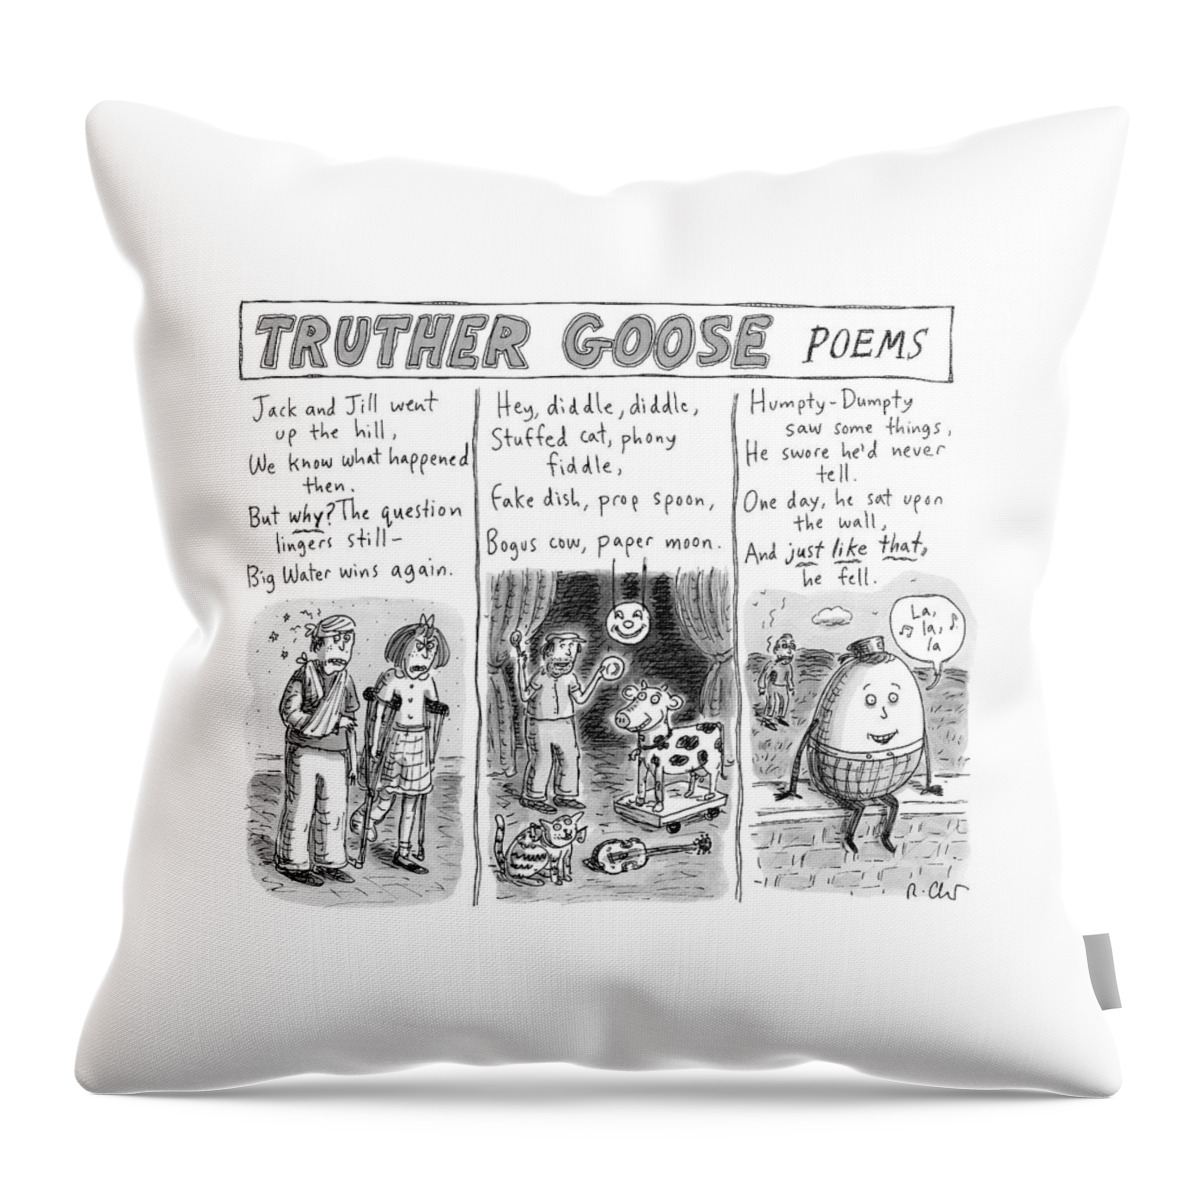 Truther Goose Poems -- A Triptych Of Mother Goose Throw Pillow